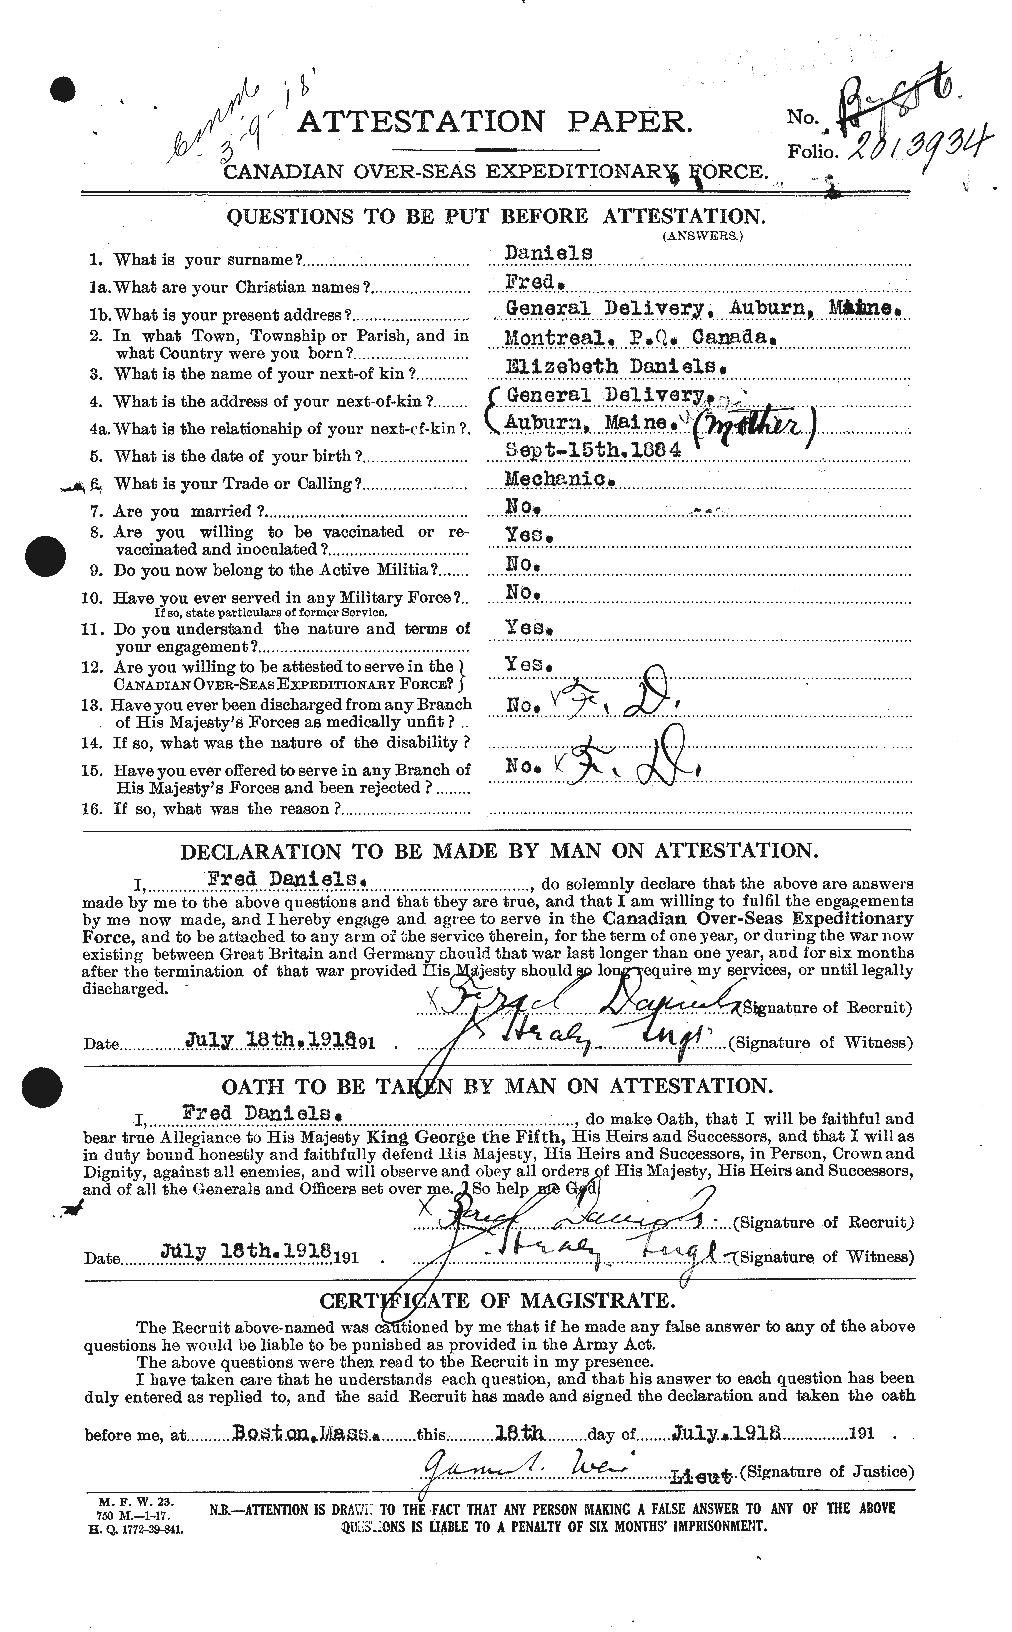 Personnel Records of the First World War - CEF 279592a